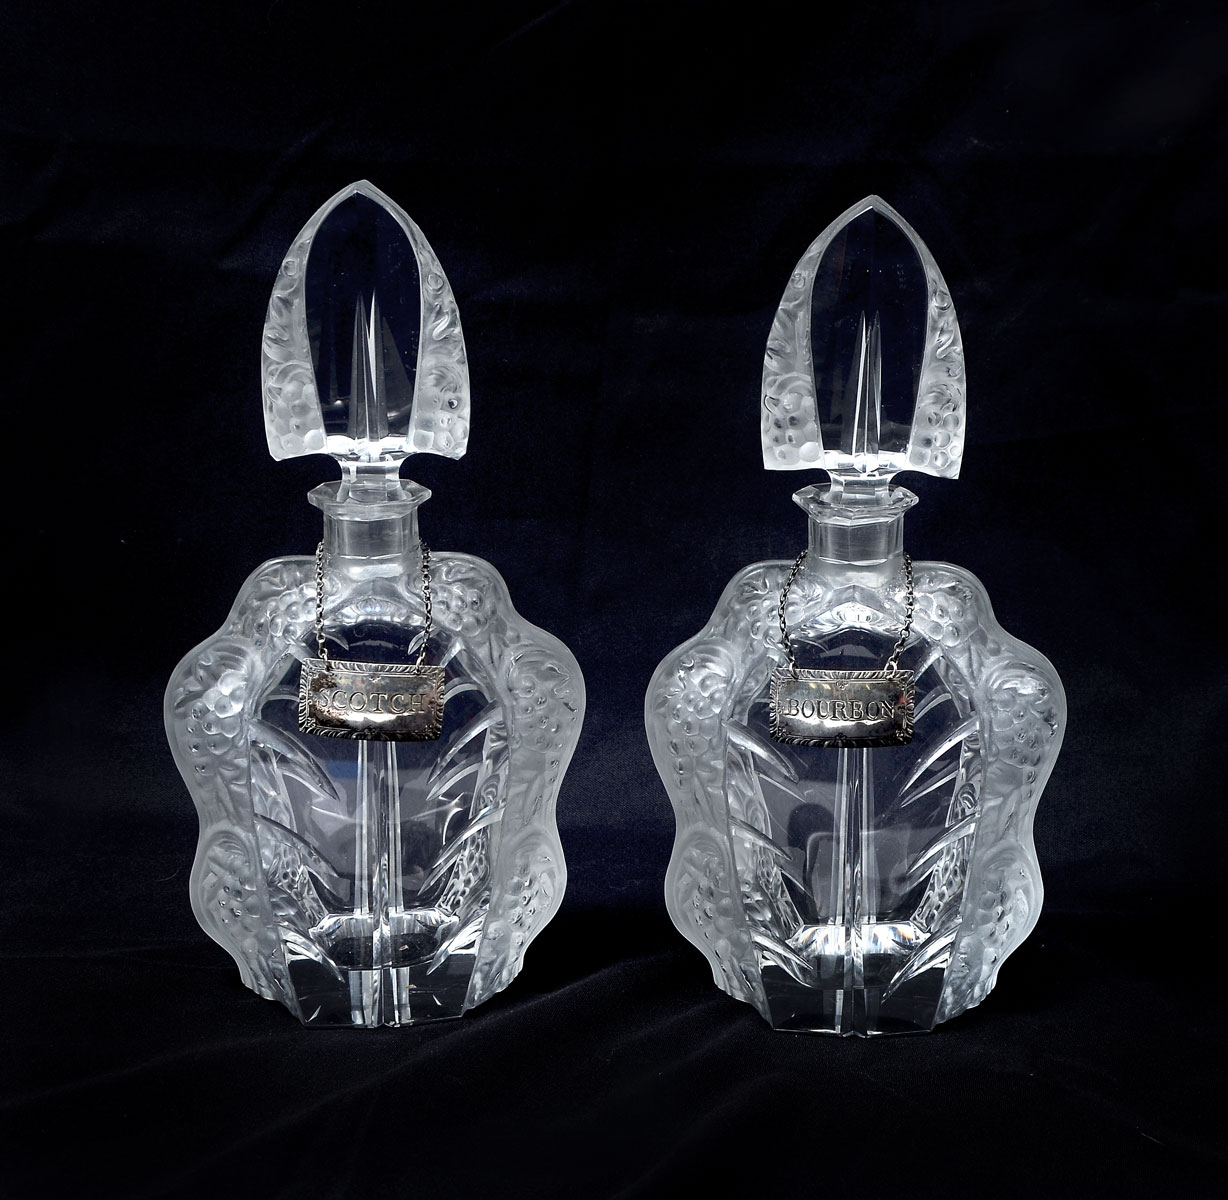 PR OF LALIQUE STYLE DECANTERS: Each